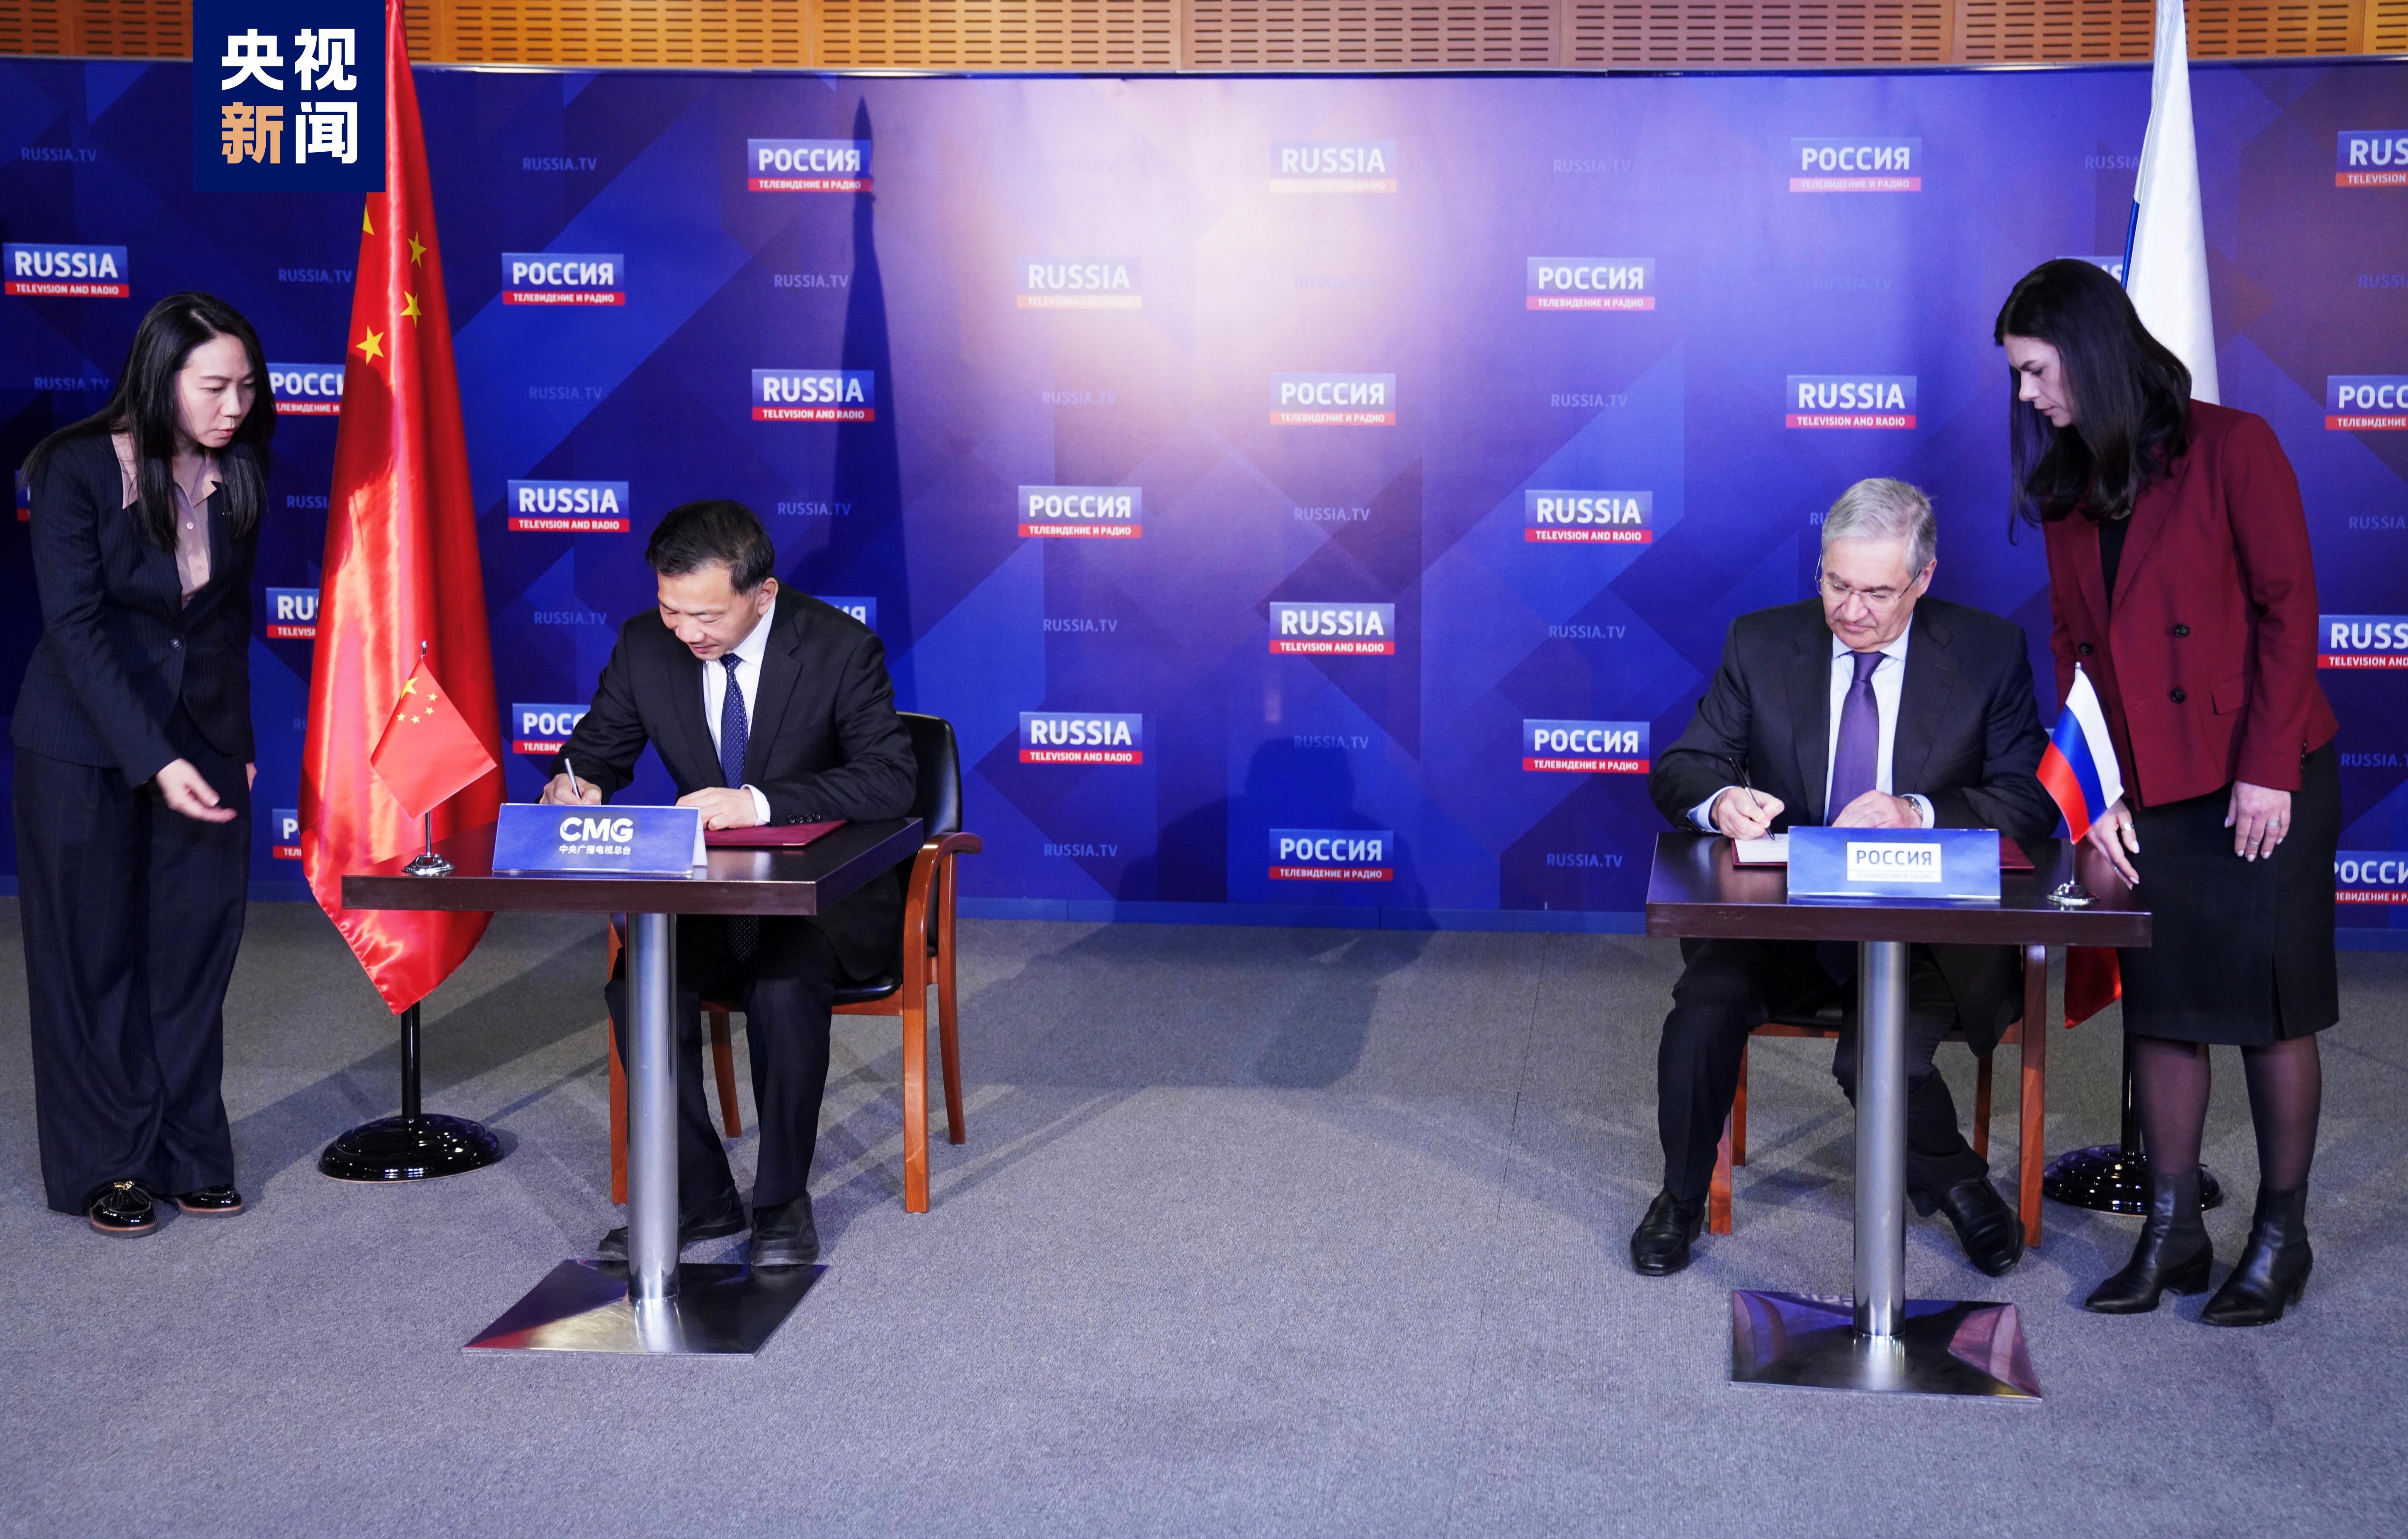 Shen Haixiong, President of CMG, and Oleg Dobrodeev, CEO of VGTRK, sign a memorandum of cooperation in Moscow on March 21, 2023. /CMG